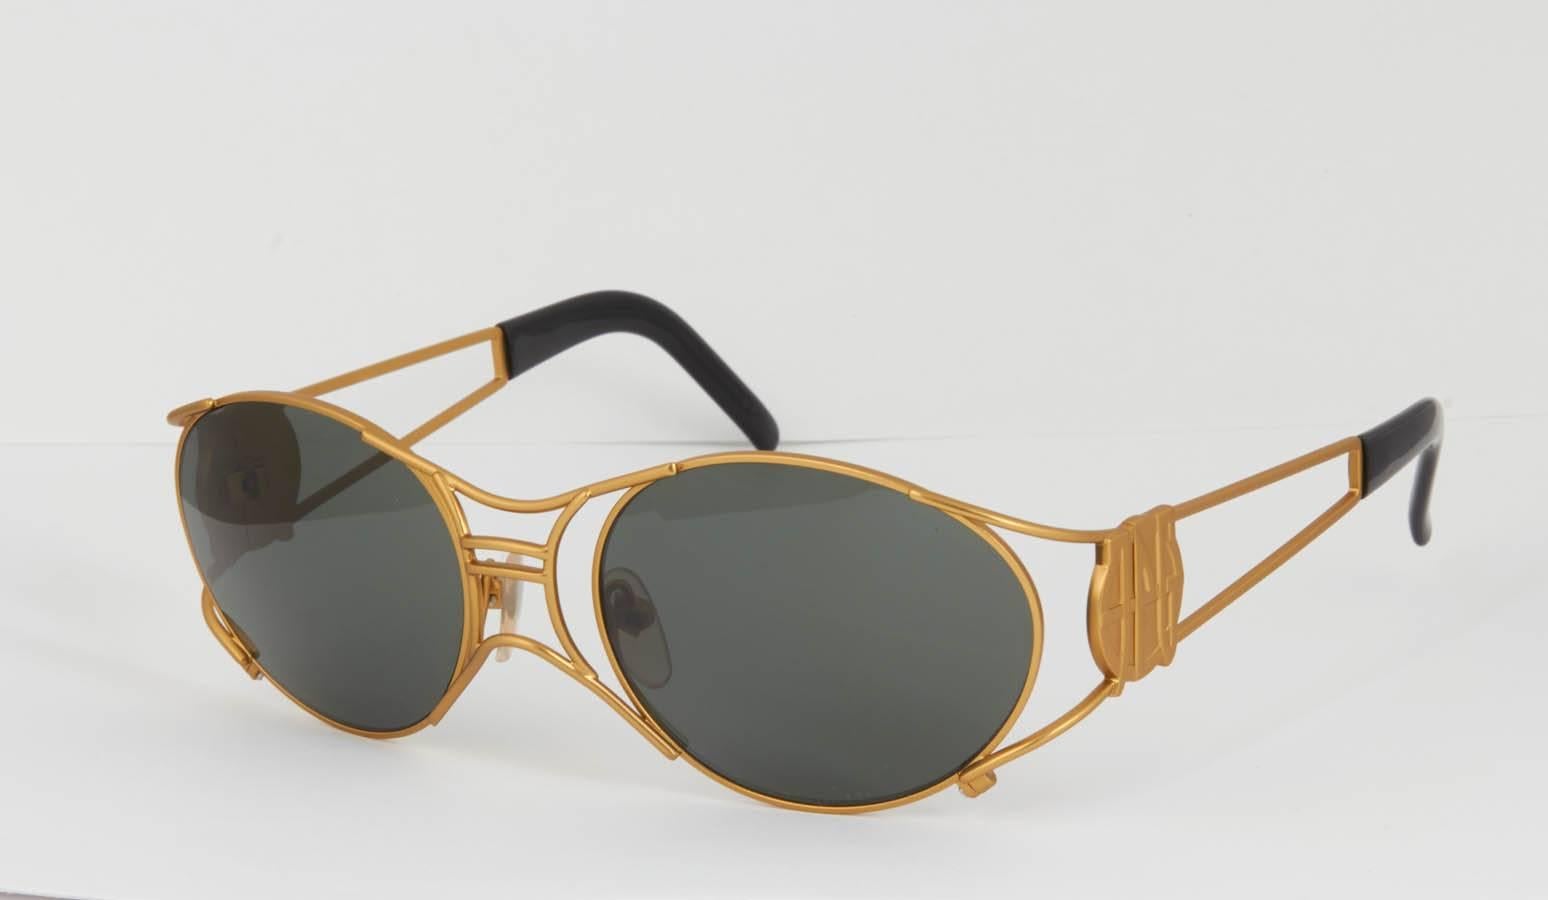 Jean Paul Gaultier Vintage Sunglasses 58-6101 In Excellent Condition For Sale In Chicago, IL